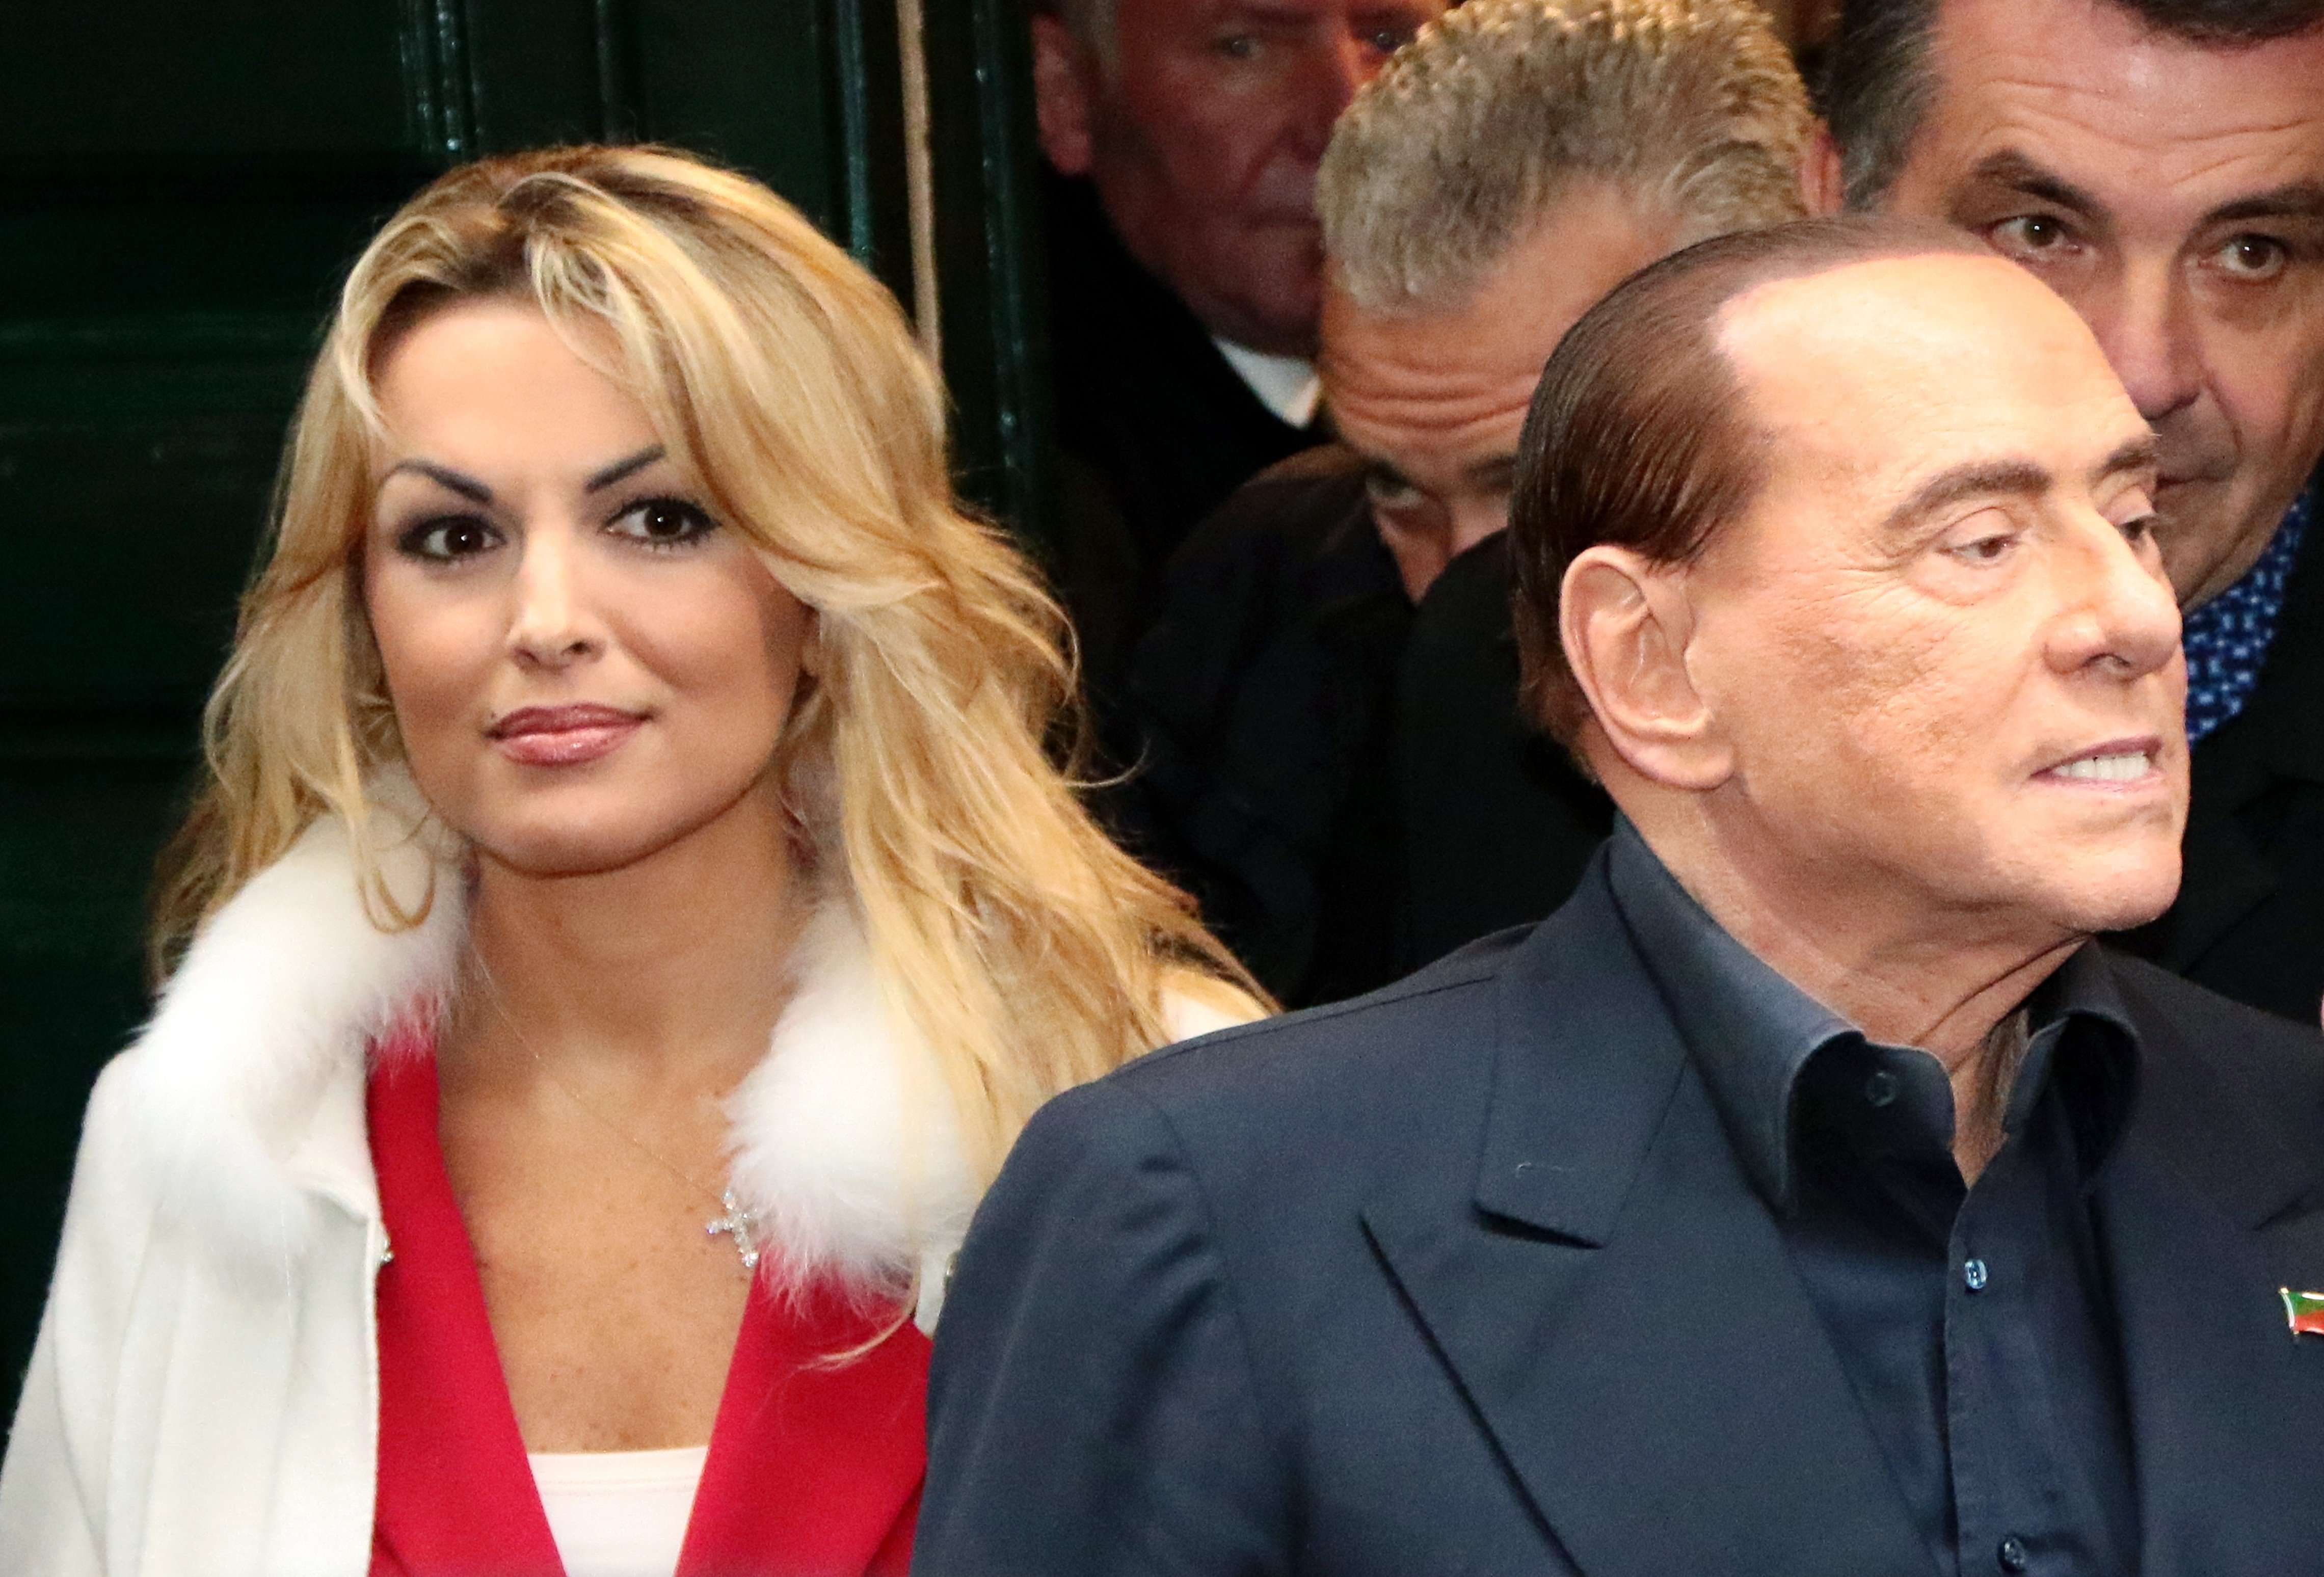 Silvio Berlusconi and Francesca Pascale were together for 10 years. Photo: AFP